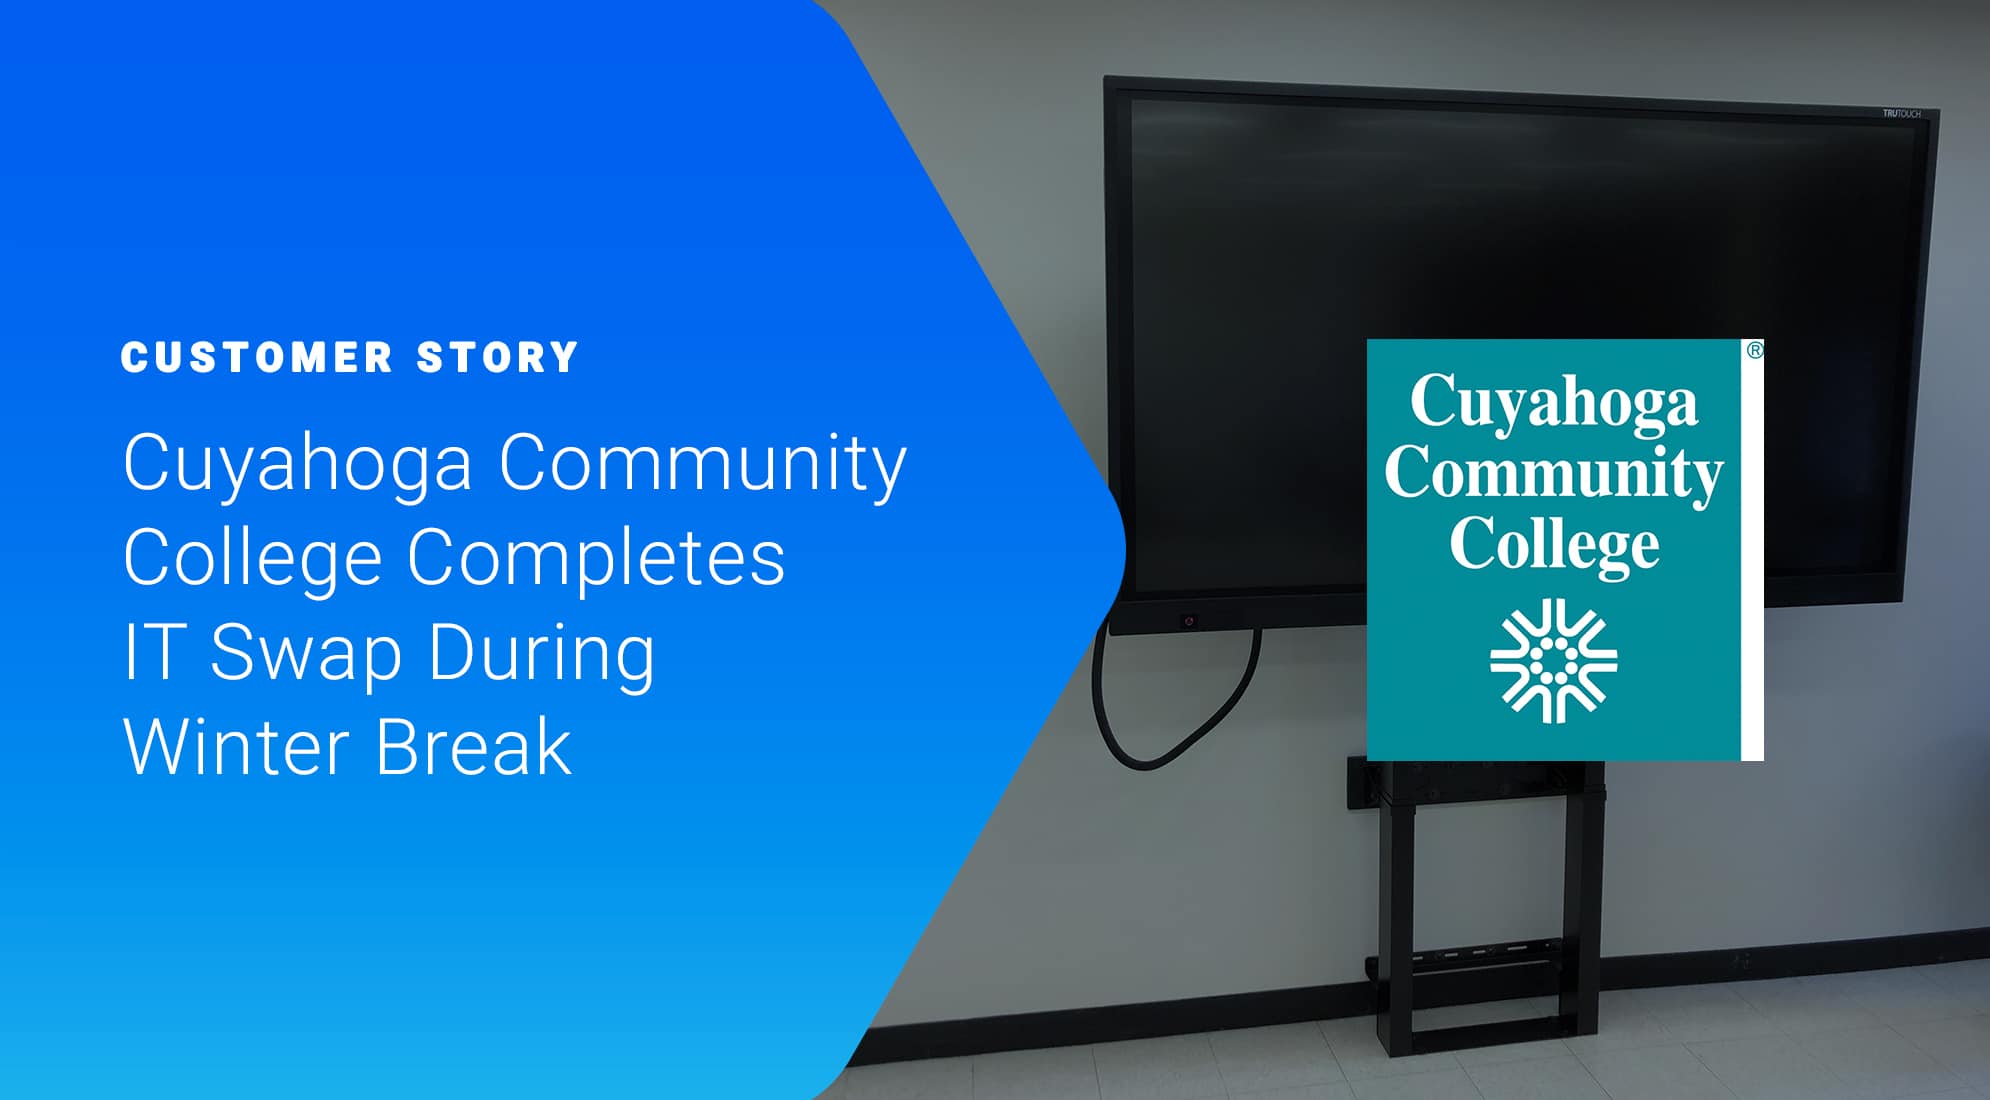 Cuyahoga Community College Completes Classroom Upgrades During Winter Break 3